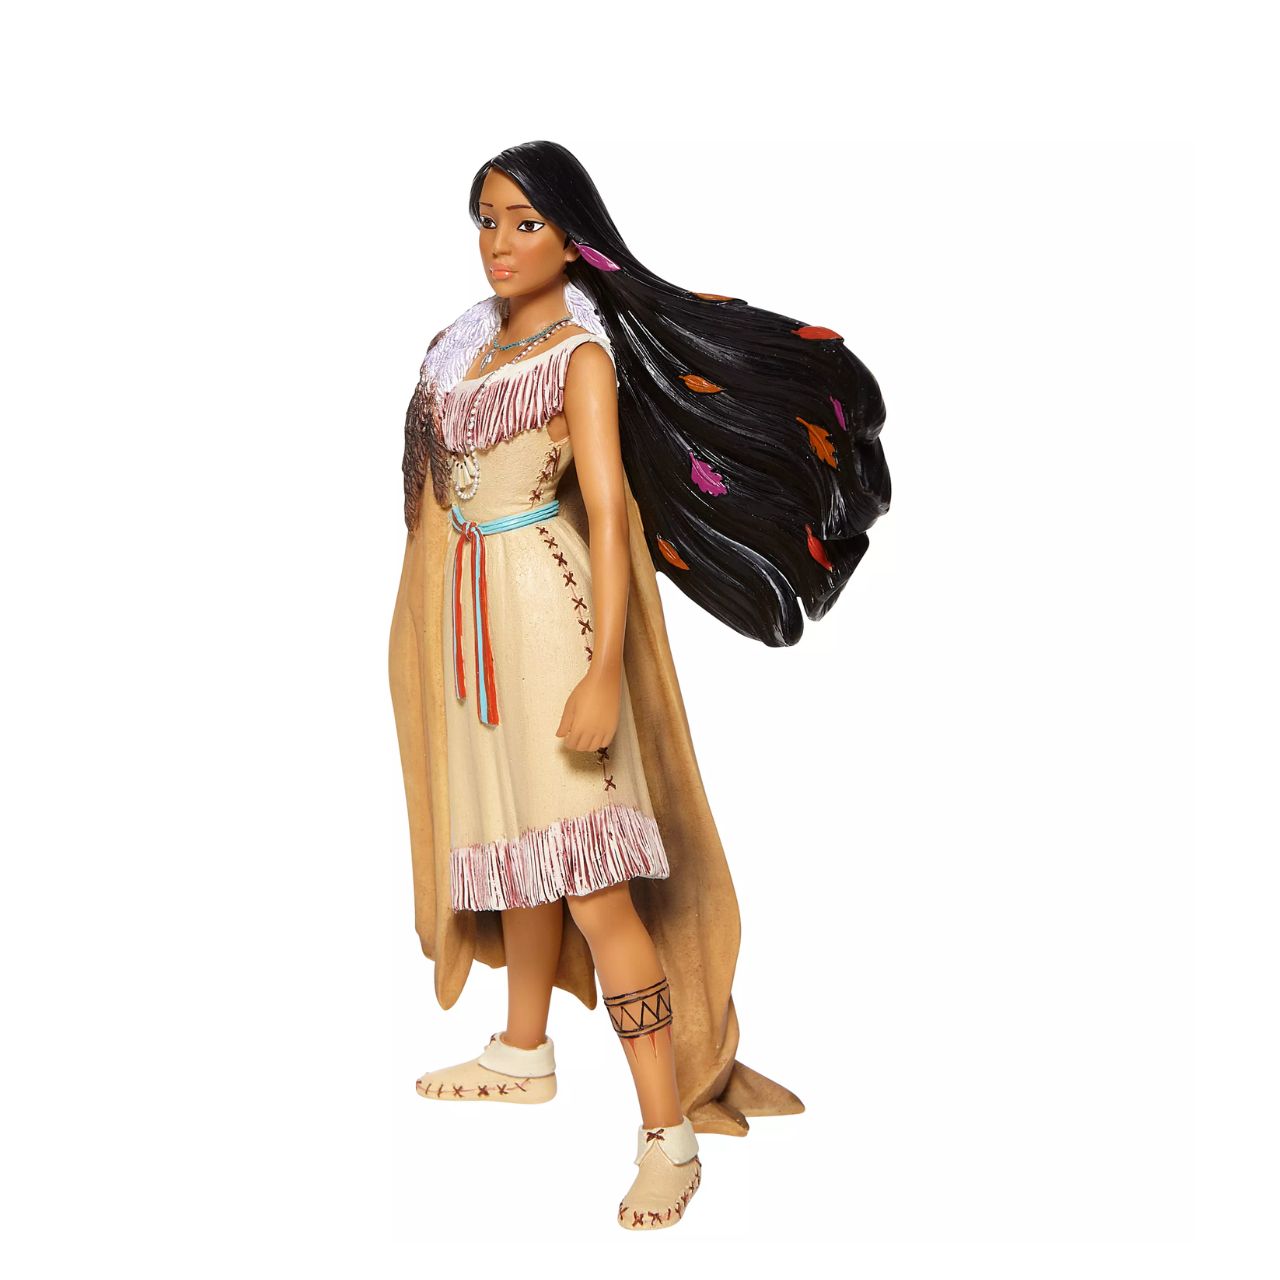 Pocahontas, daughter of Chief Powhatan of the Virginian native American tribe, strikes a powerful pose in this captivating Disney statuette. With colours in her hair and moccasins on her feet, she is a vision of beauty and female capability.